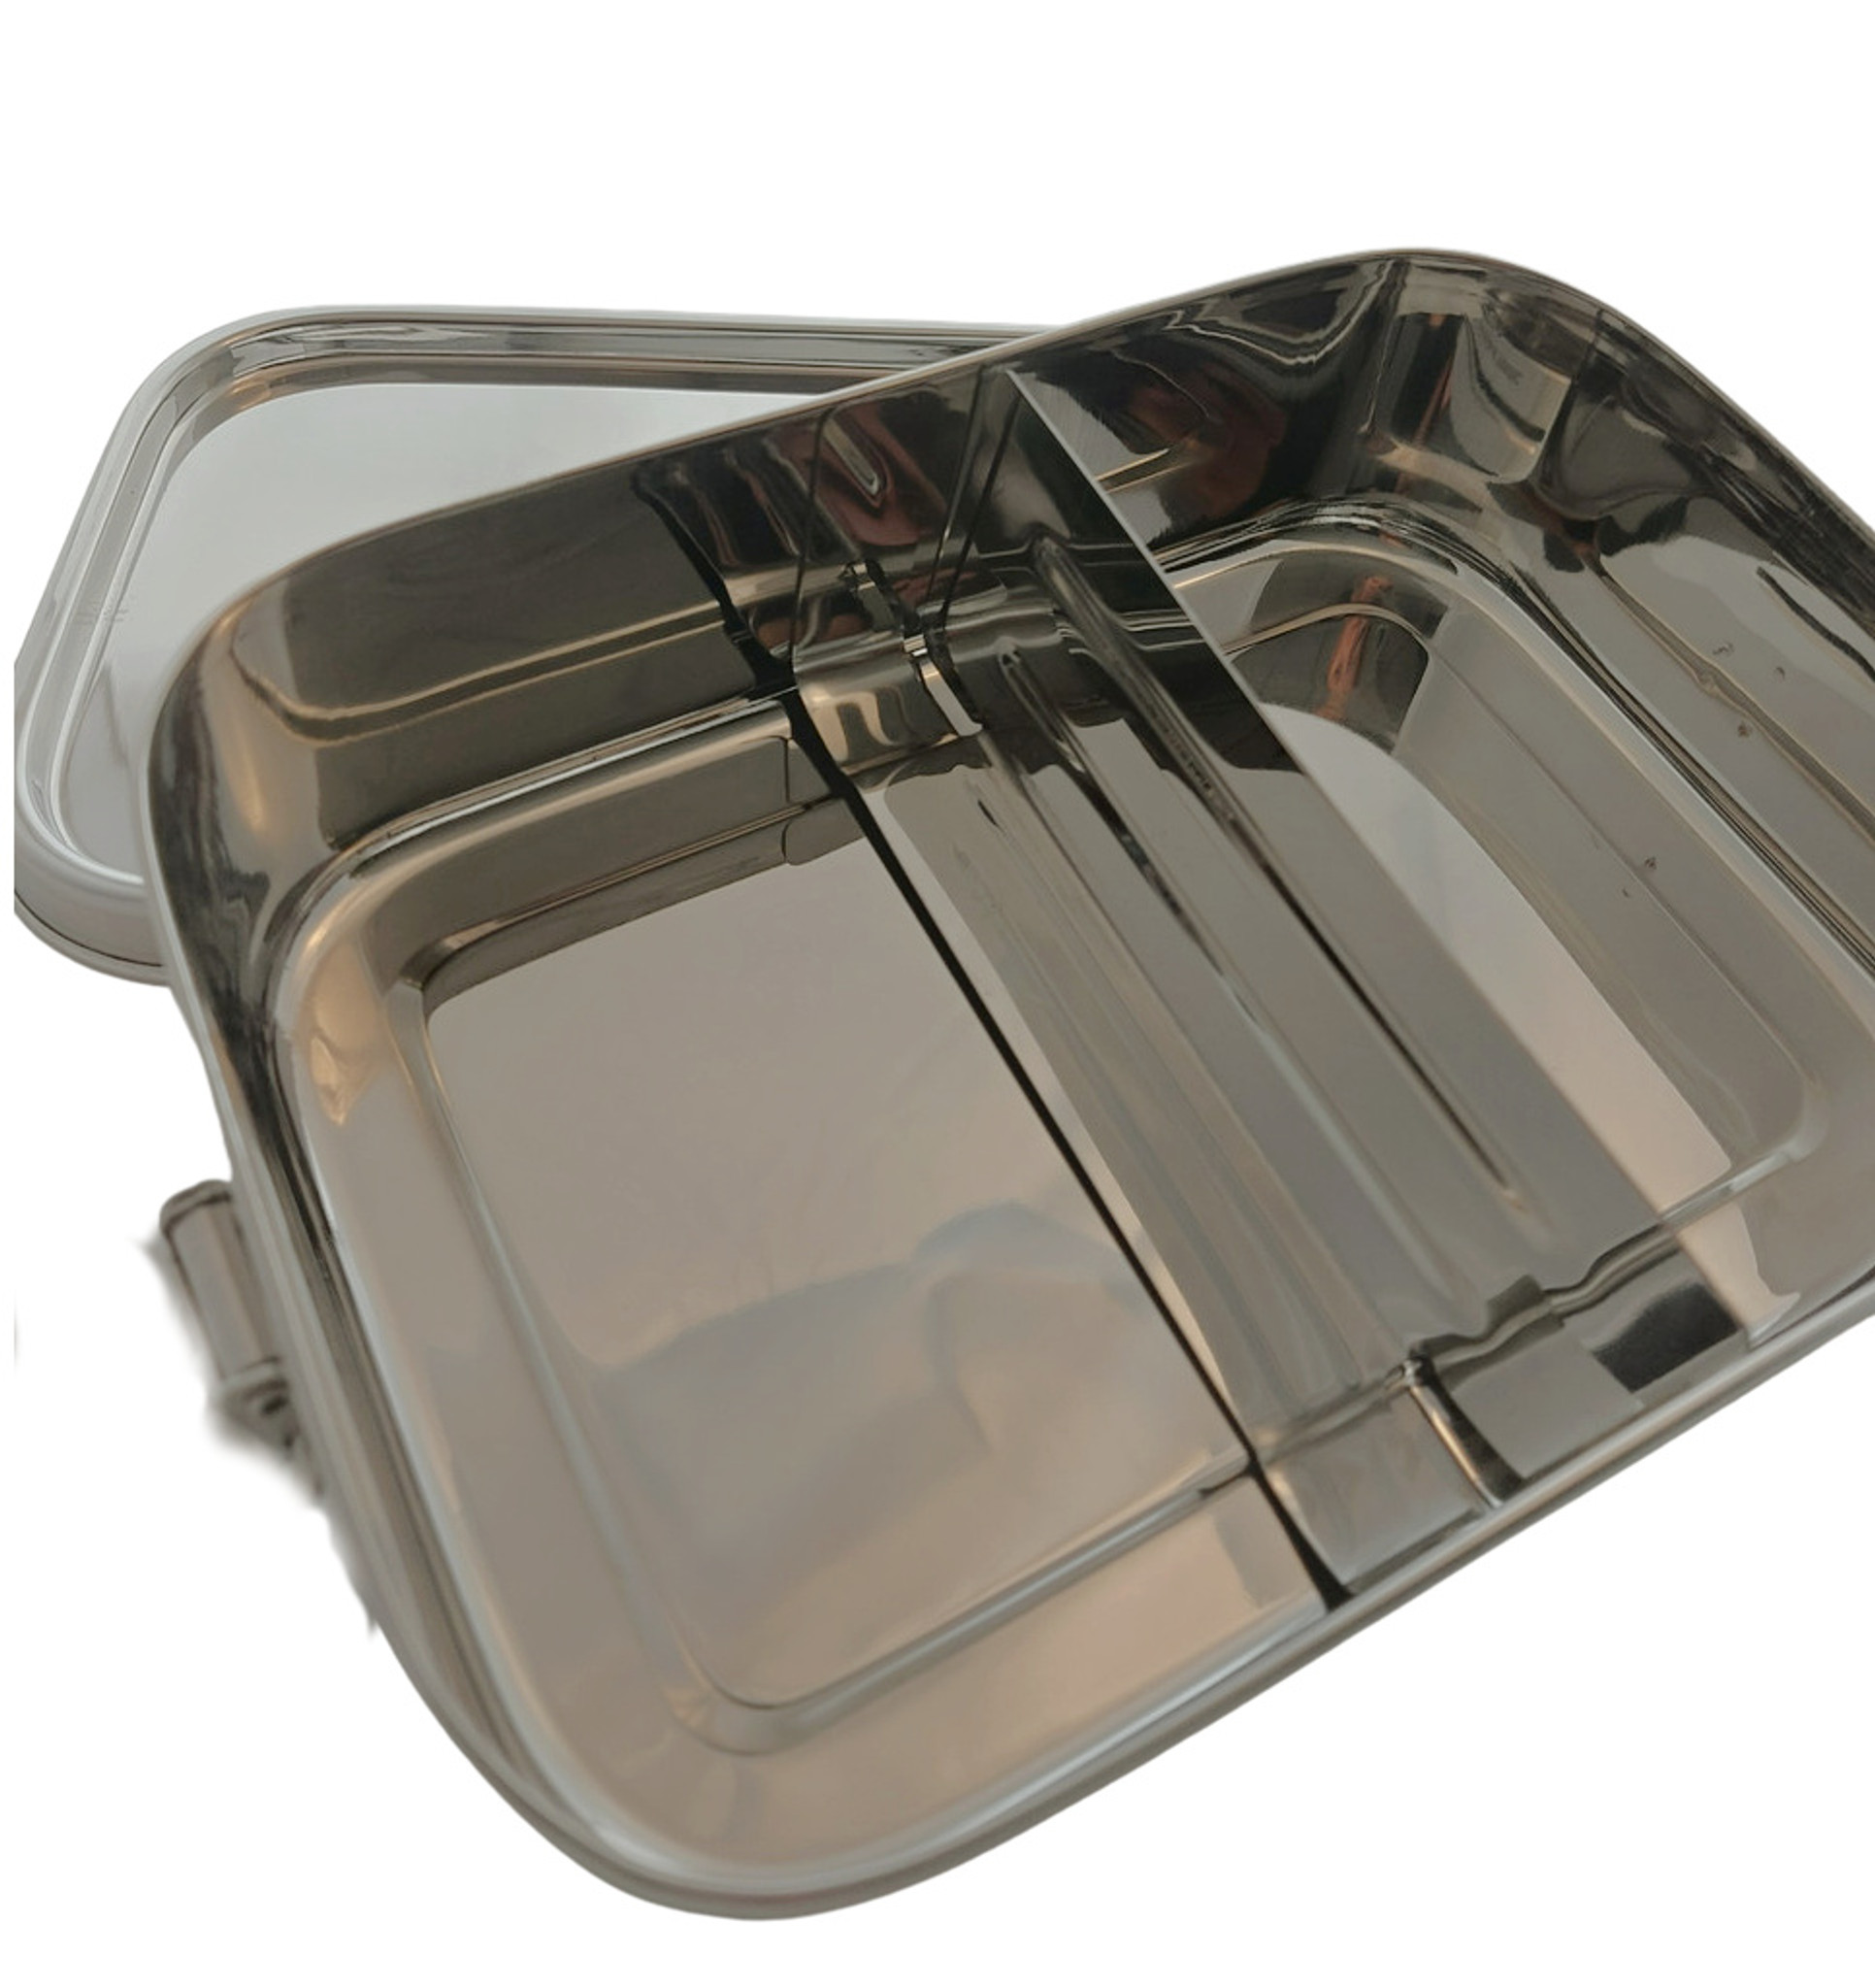 Removable stainless steel divider for plastic-free rectangular